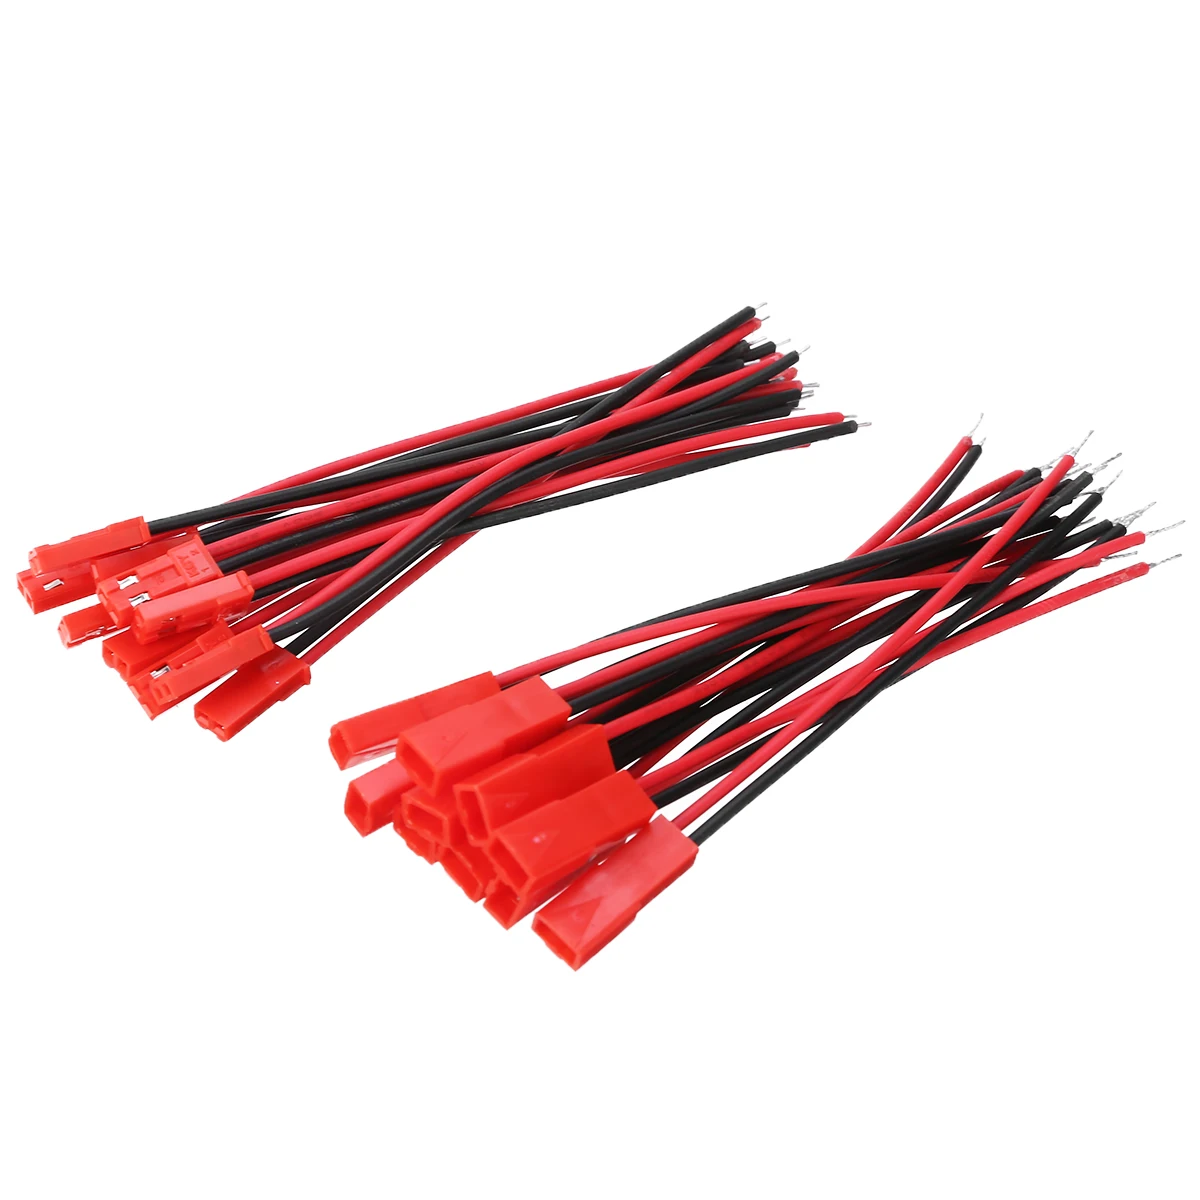 20pcs 2 Pin Connector Male Female JST Plug Cable 22 AWG Wire For RC Batter CPUK 